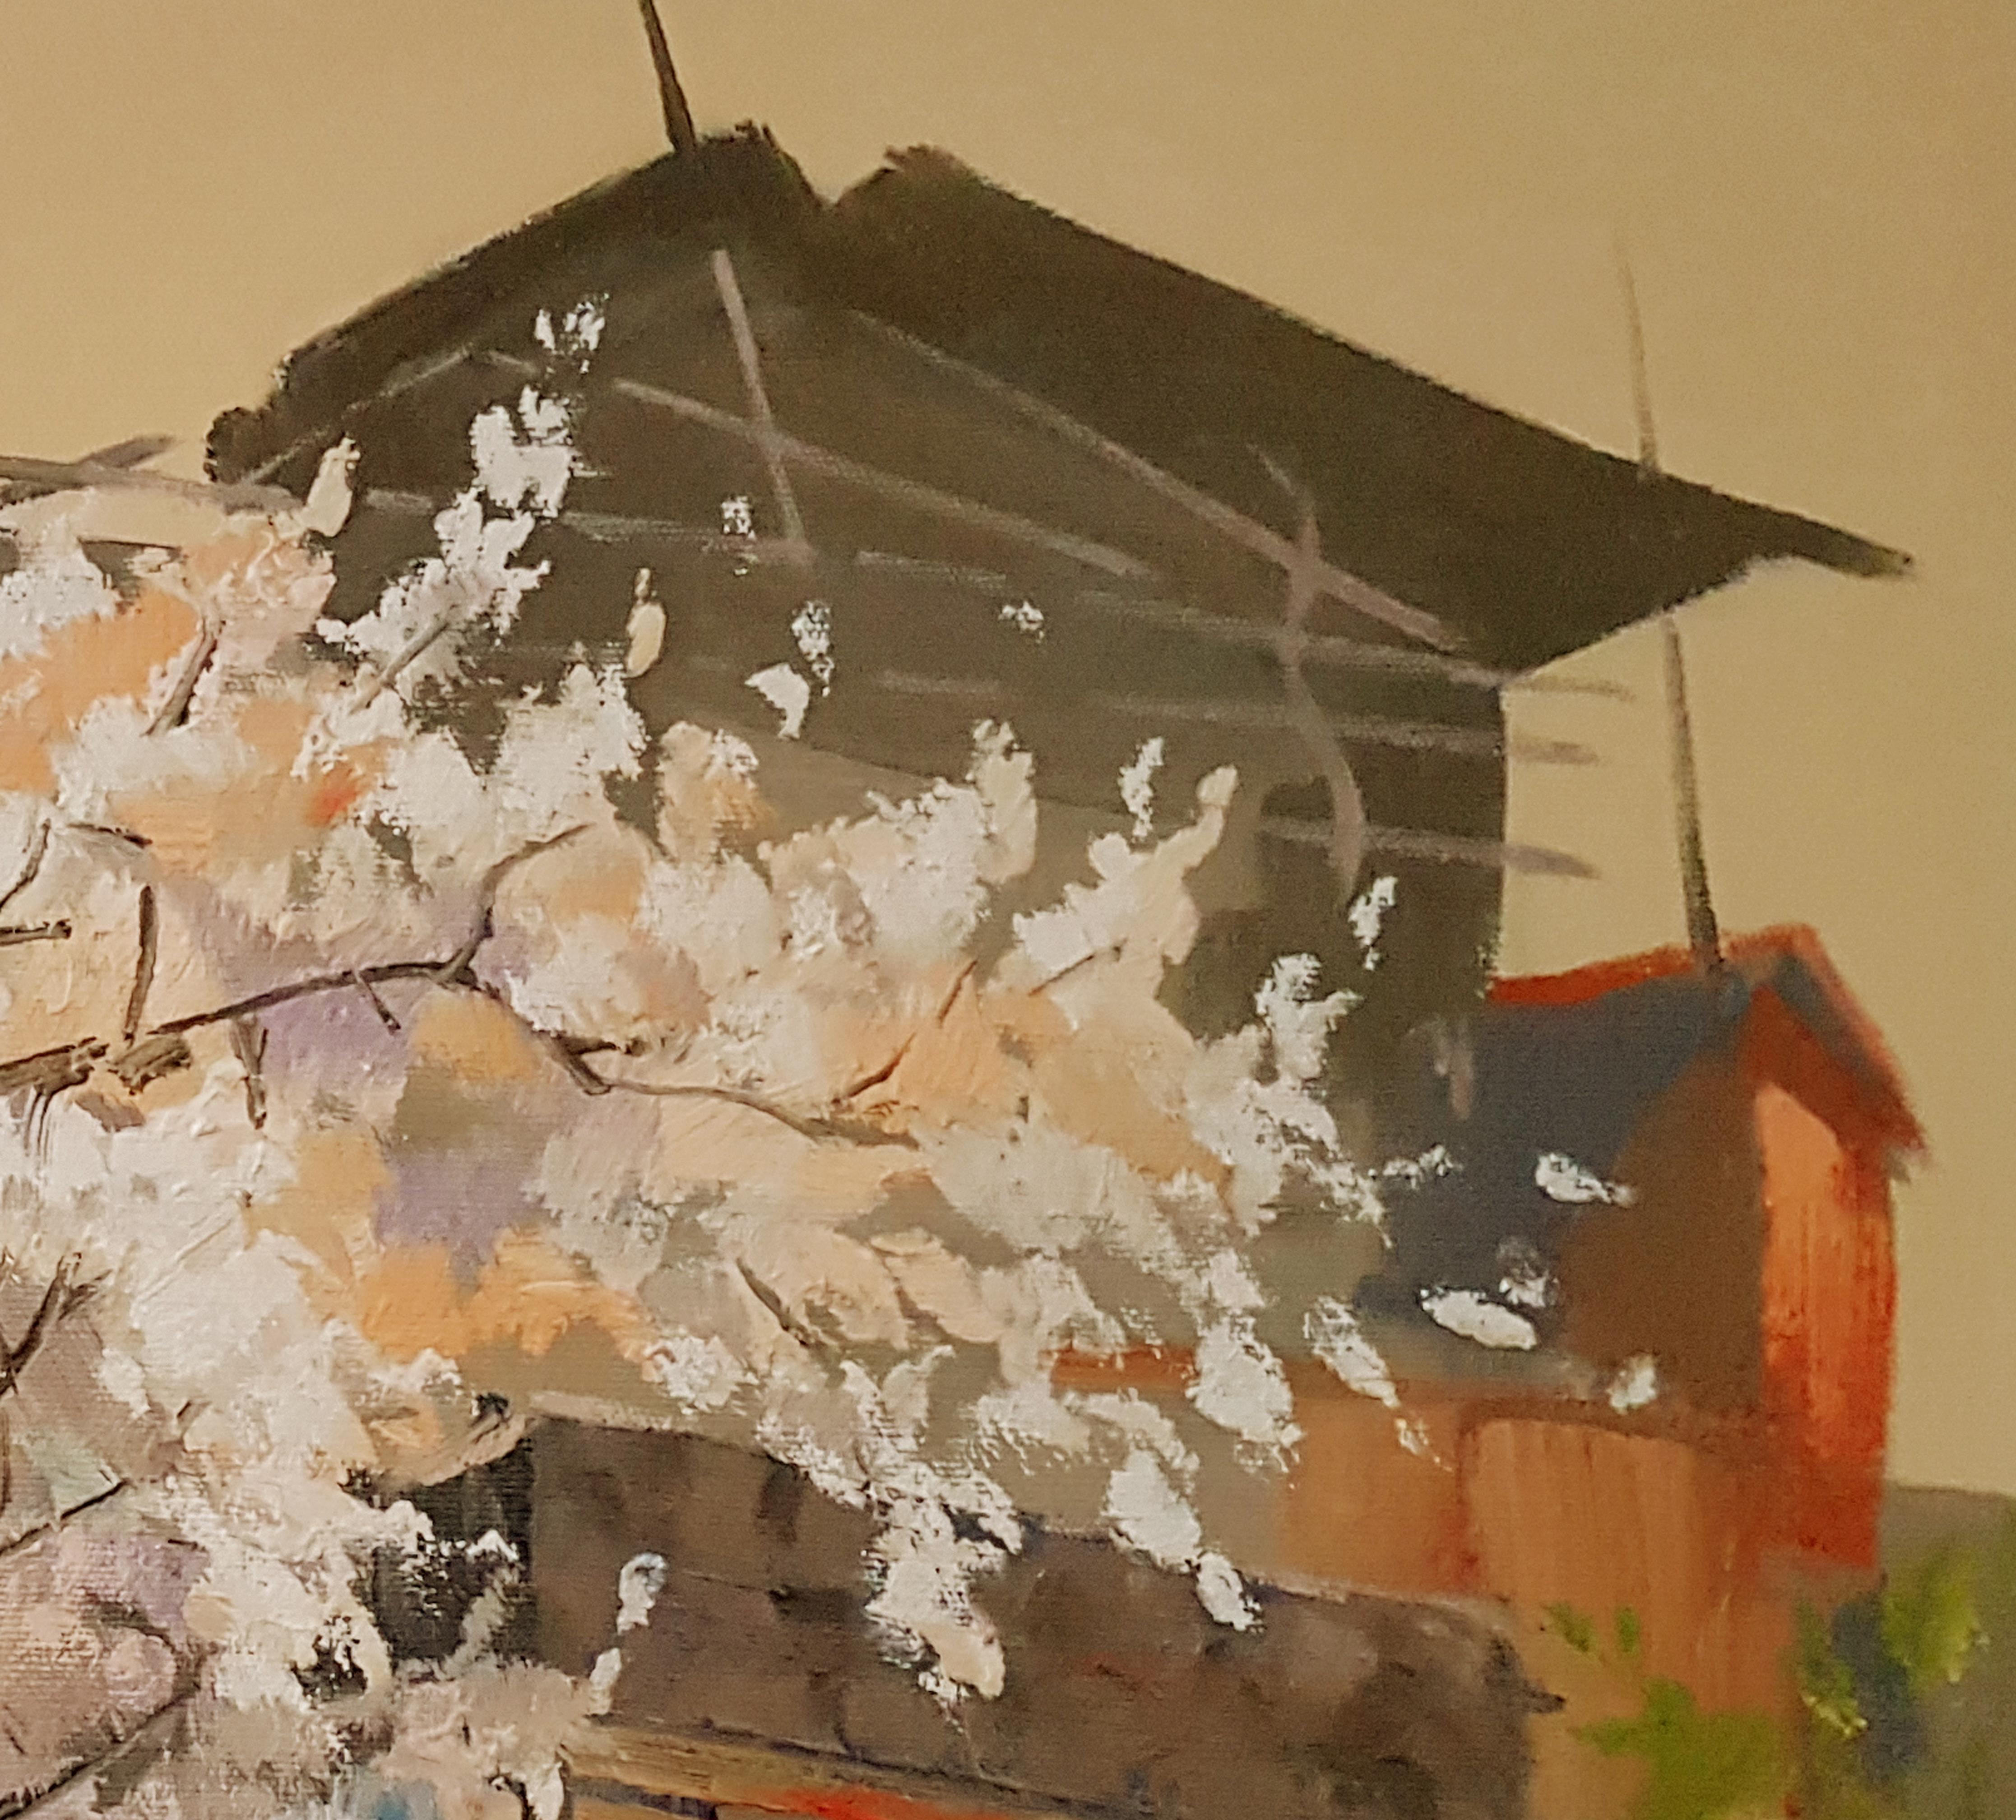 Artist: Ara H. Hakobyan
Work: Original Oil Painting, Handmade Artwork, One of a Kind
Medium: Oil on Canvas
Year: 2019
Style: Impressionism
Subject: Under the Blossomed Tree, 
Size: 16